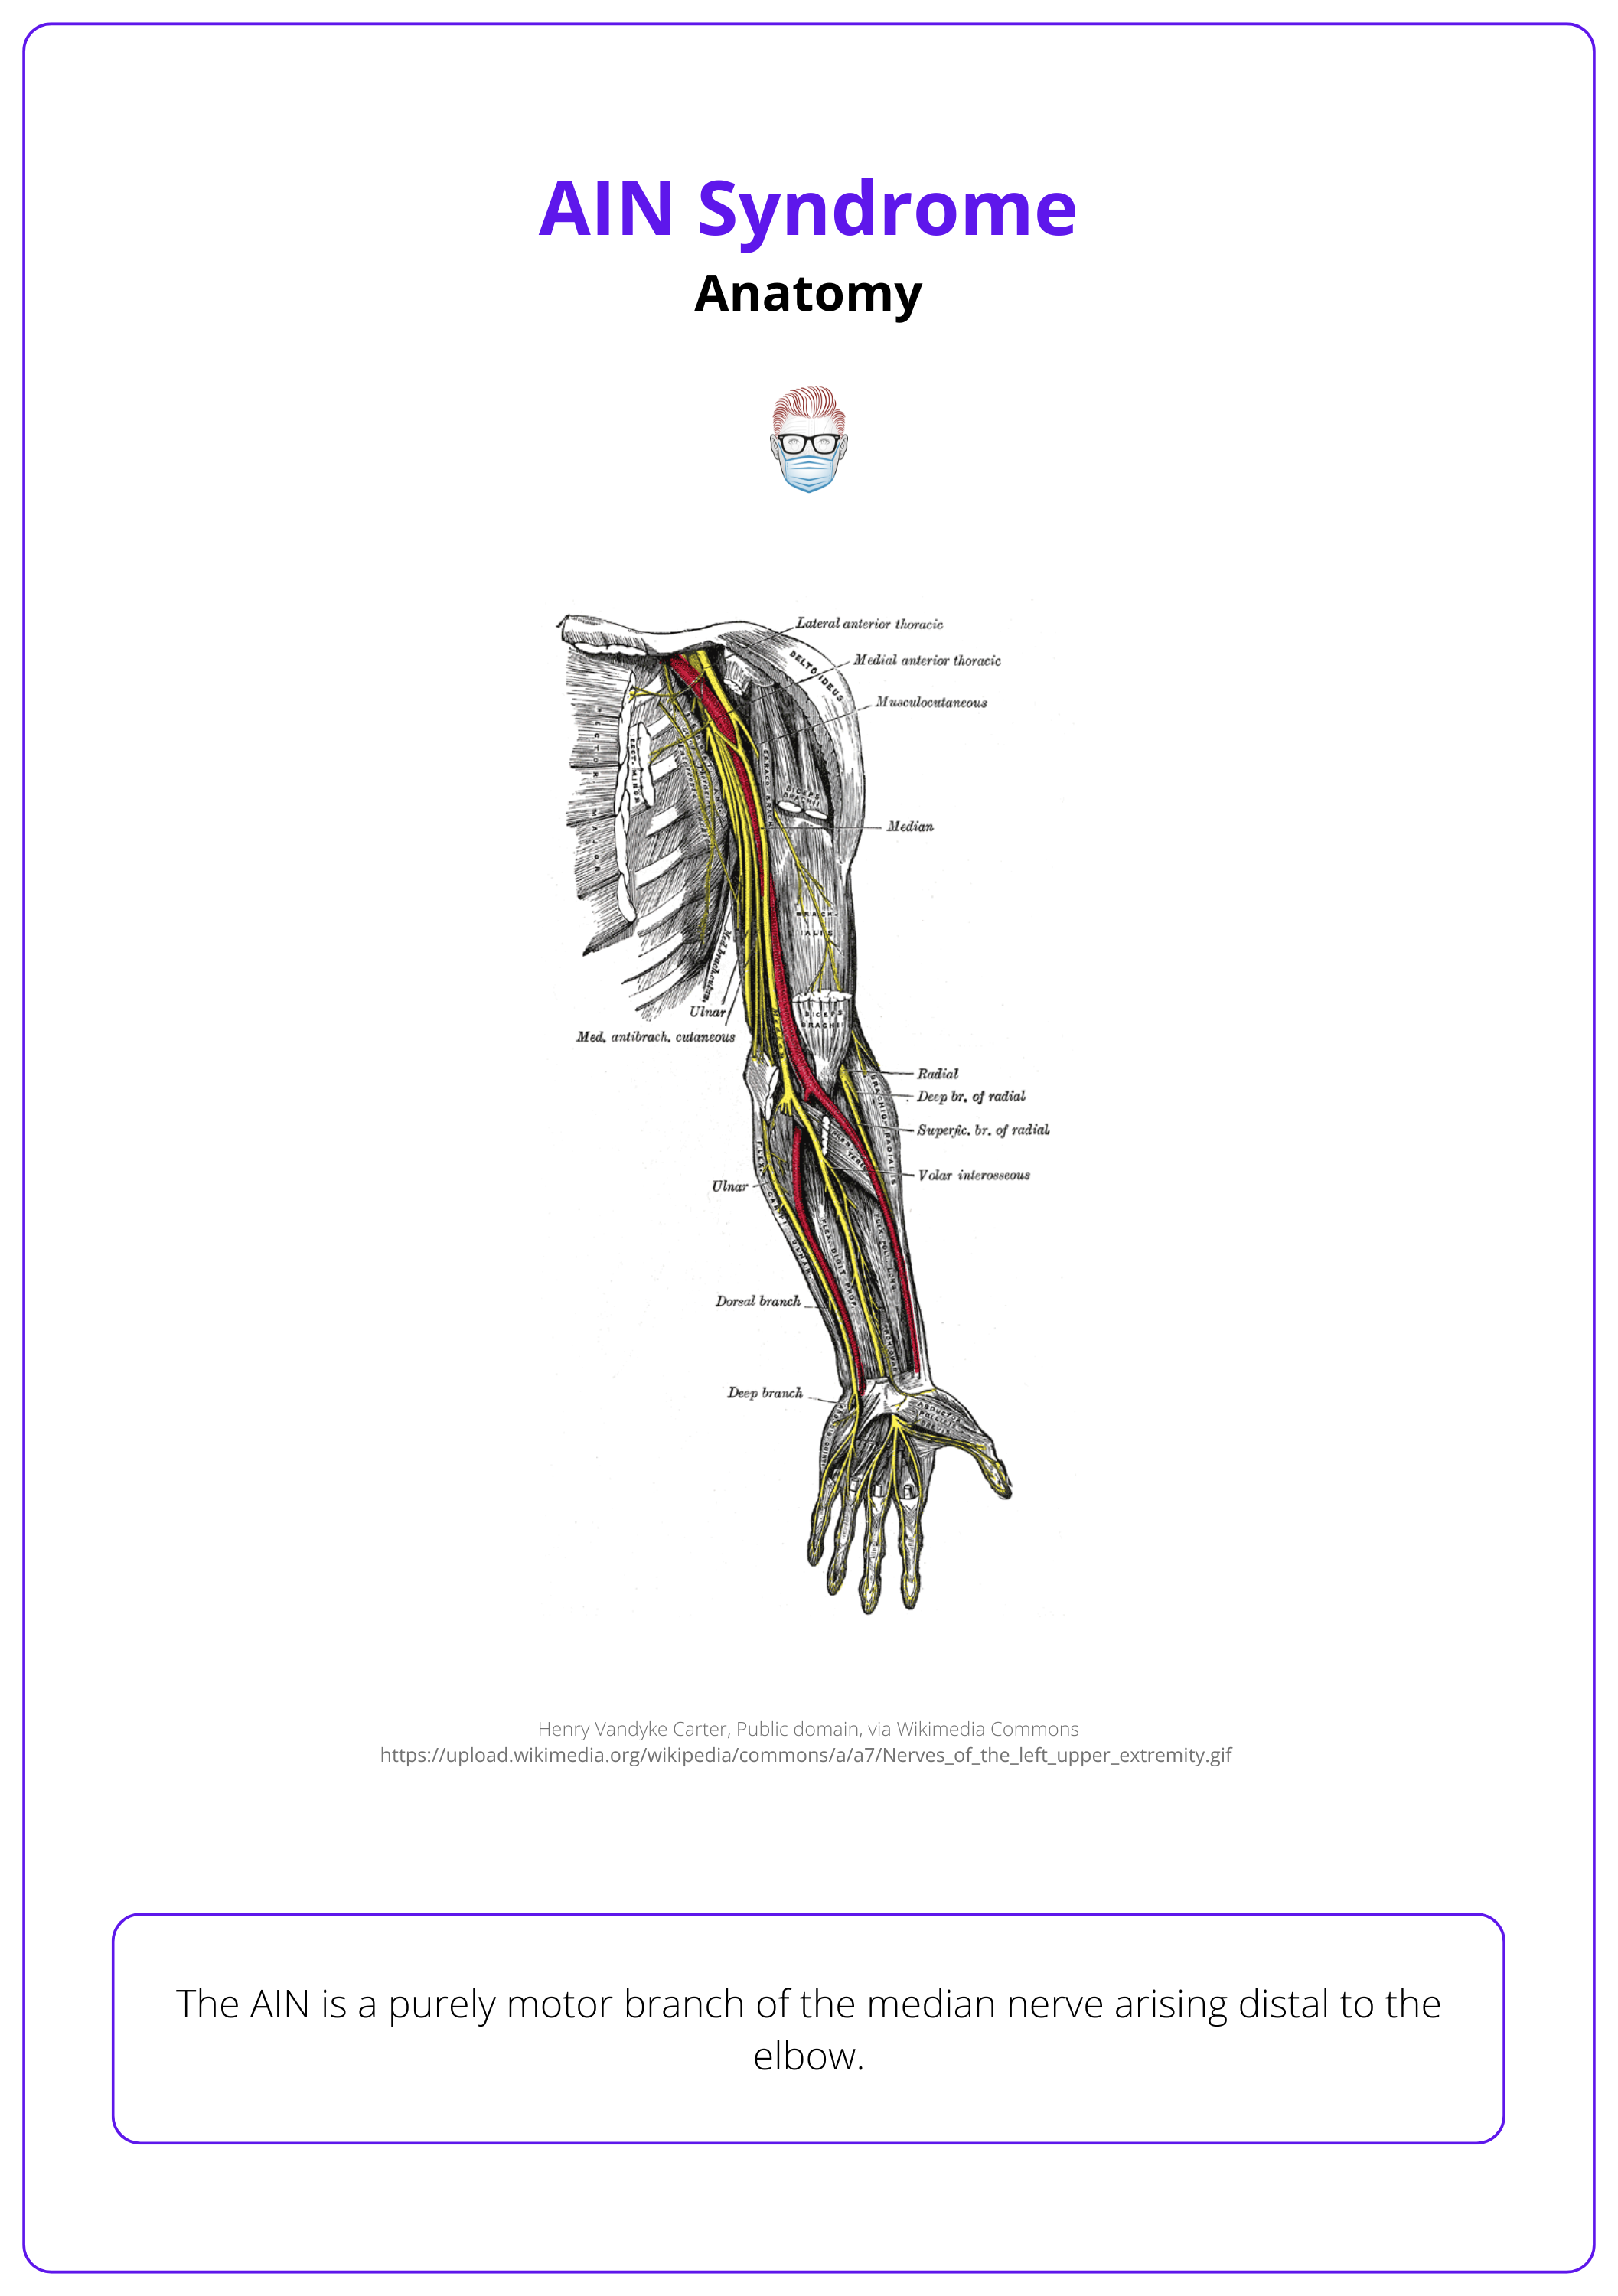 AIN as a branch of the median nerve